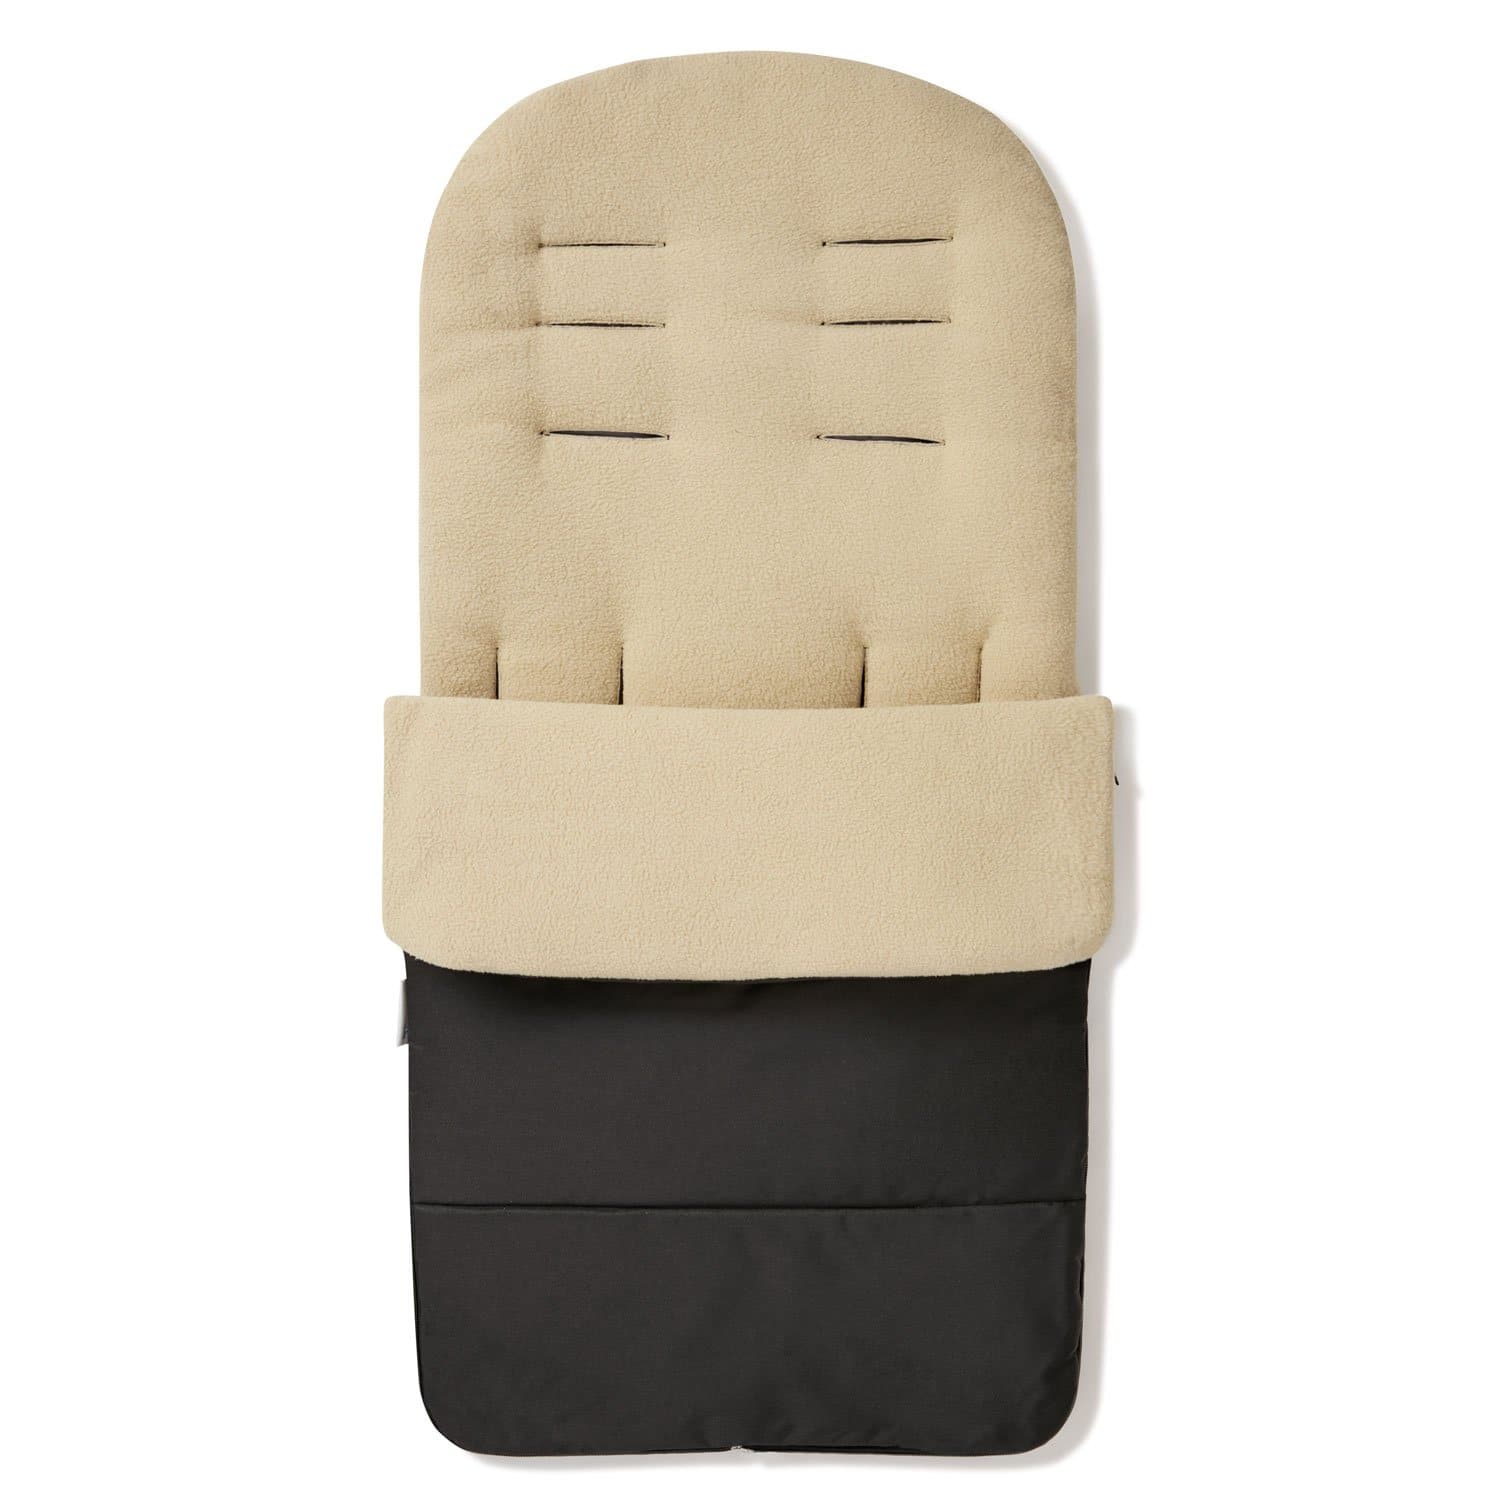 Premium Footmuff / Cosy Toes Compatible with Red Kite - Desert Sand / Fits All Models | For Your Little One